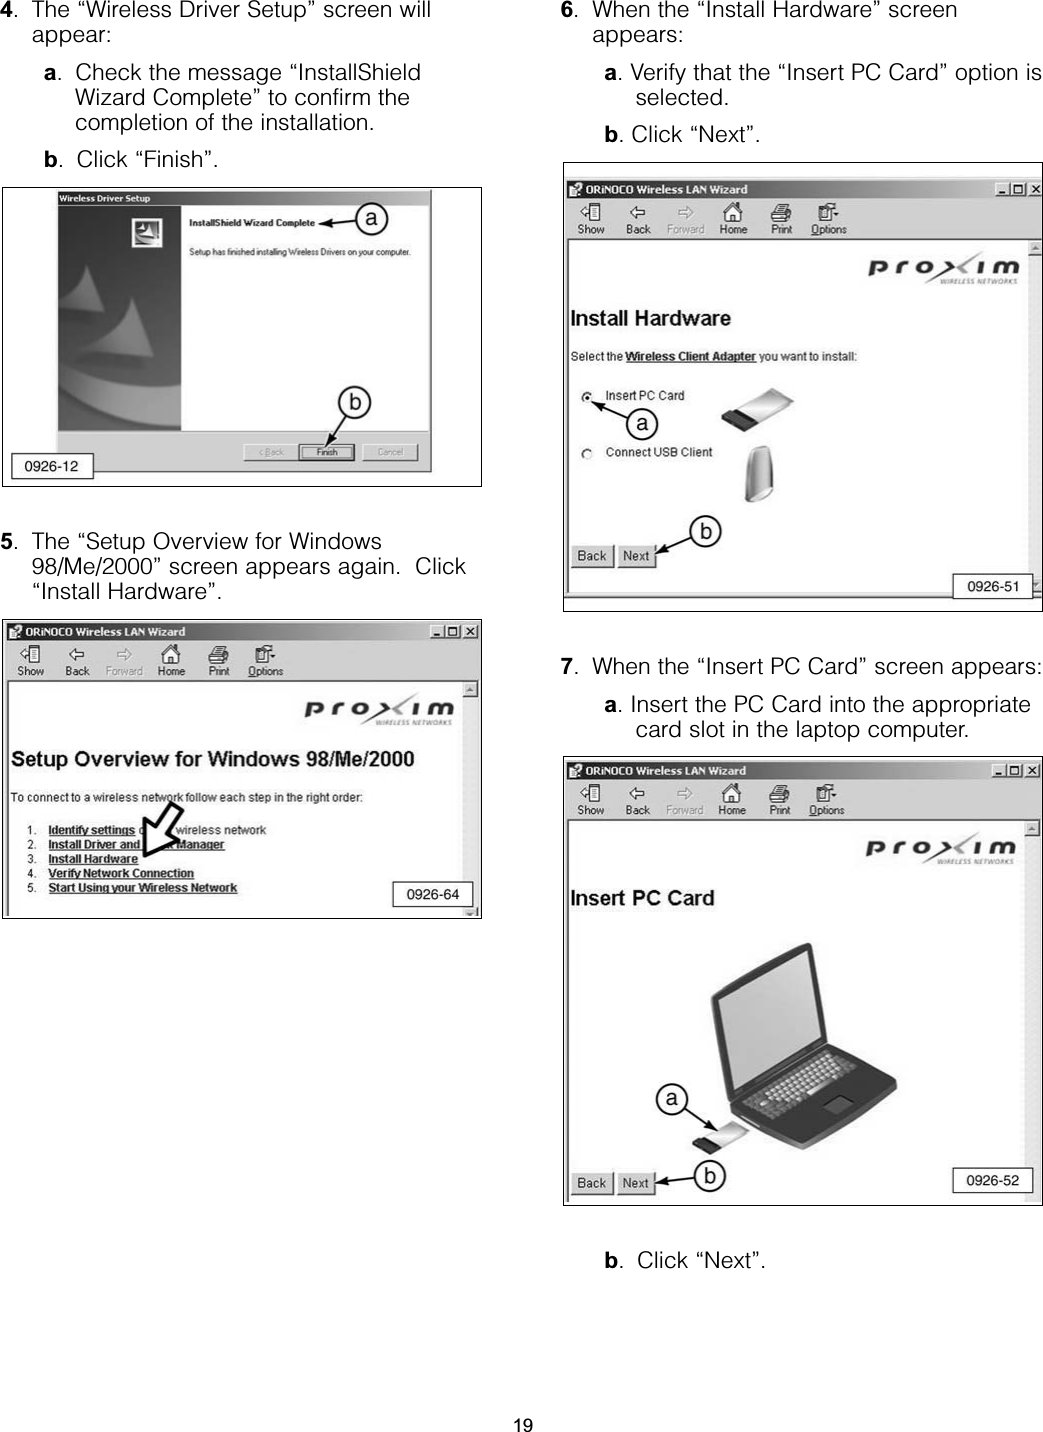 4. The “Wireless Driver Setup” screen willappear:a. Check the message “InstallShieldWizard Complete” to confirm thecompletion of the installation.b. Click “Finish”.5. The “Setup Overview for Windows98/Me/2000” screen appears again.  Click“Install Hardware”.6. When the “Install Hardware” screenappears:a. Verify that the “Insert PC Card” option isselected.b. Click “Next”.7. When the “Insert PC Card” screen appears:a. Insert the PC Card into the appropriatecard slot in the laptop computer.b. Click “Next”.19